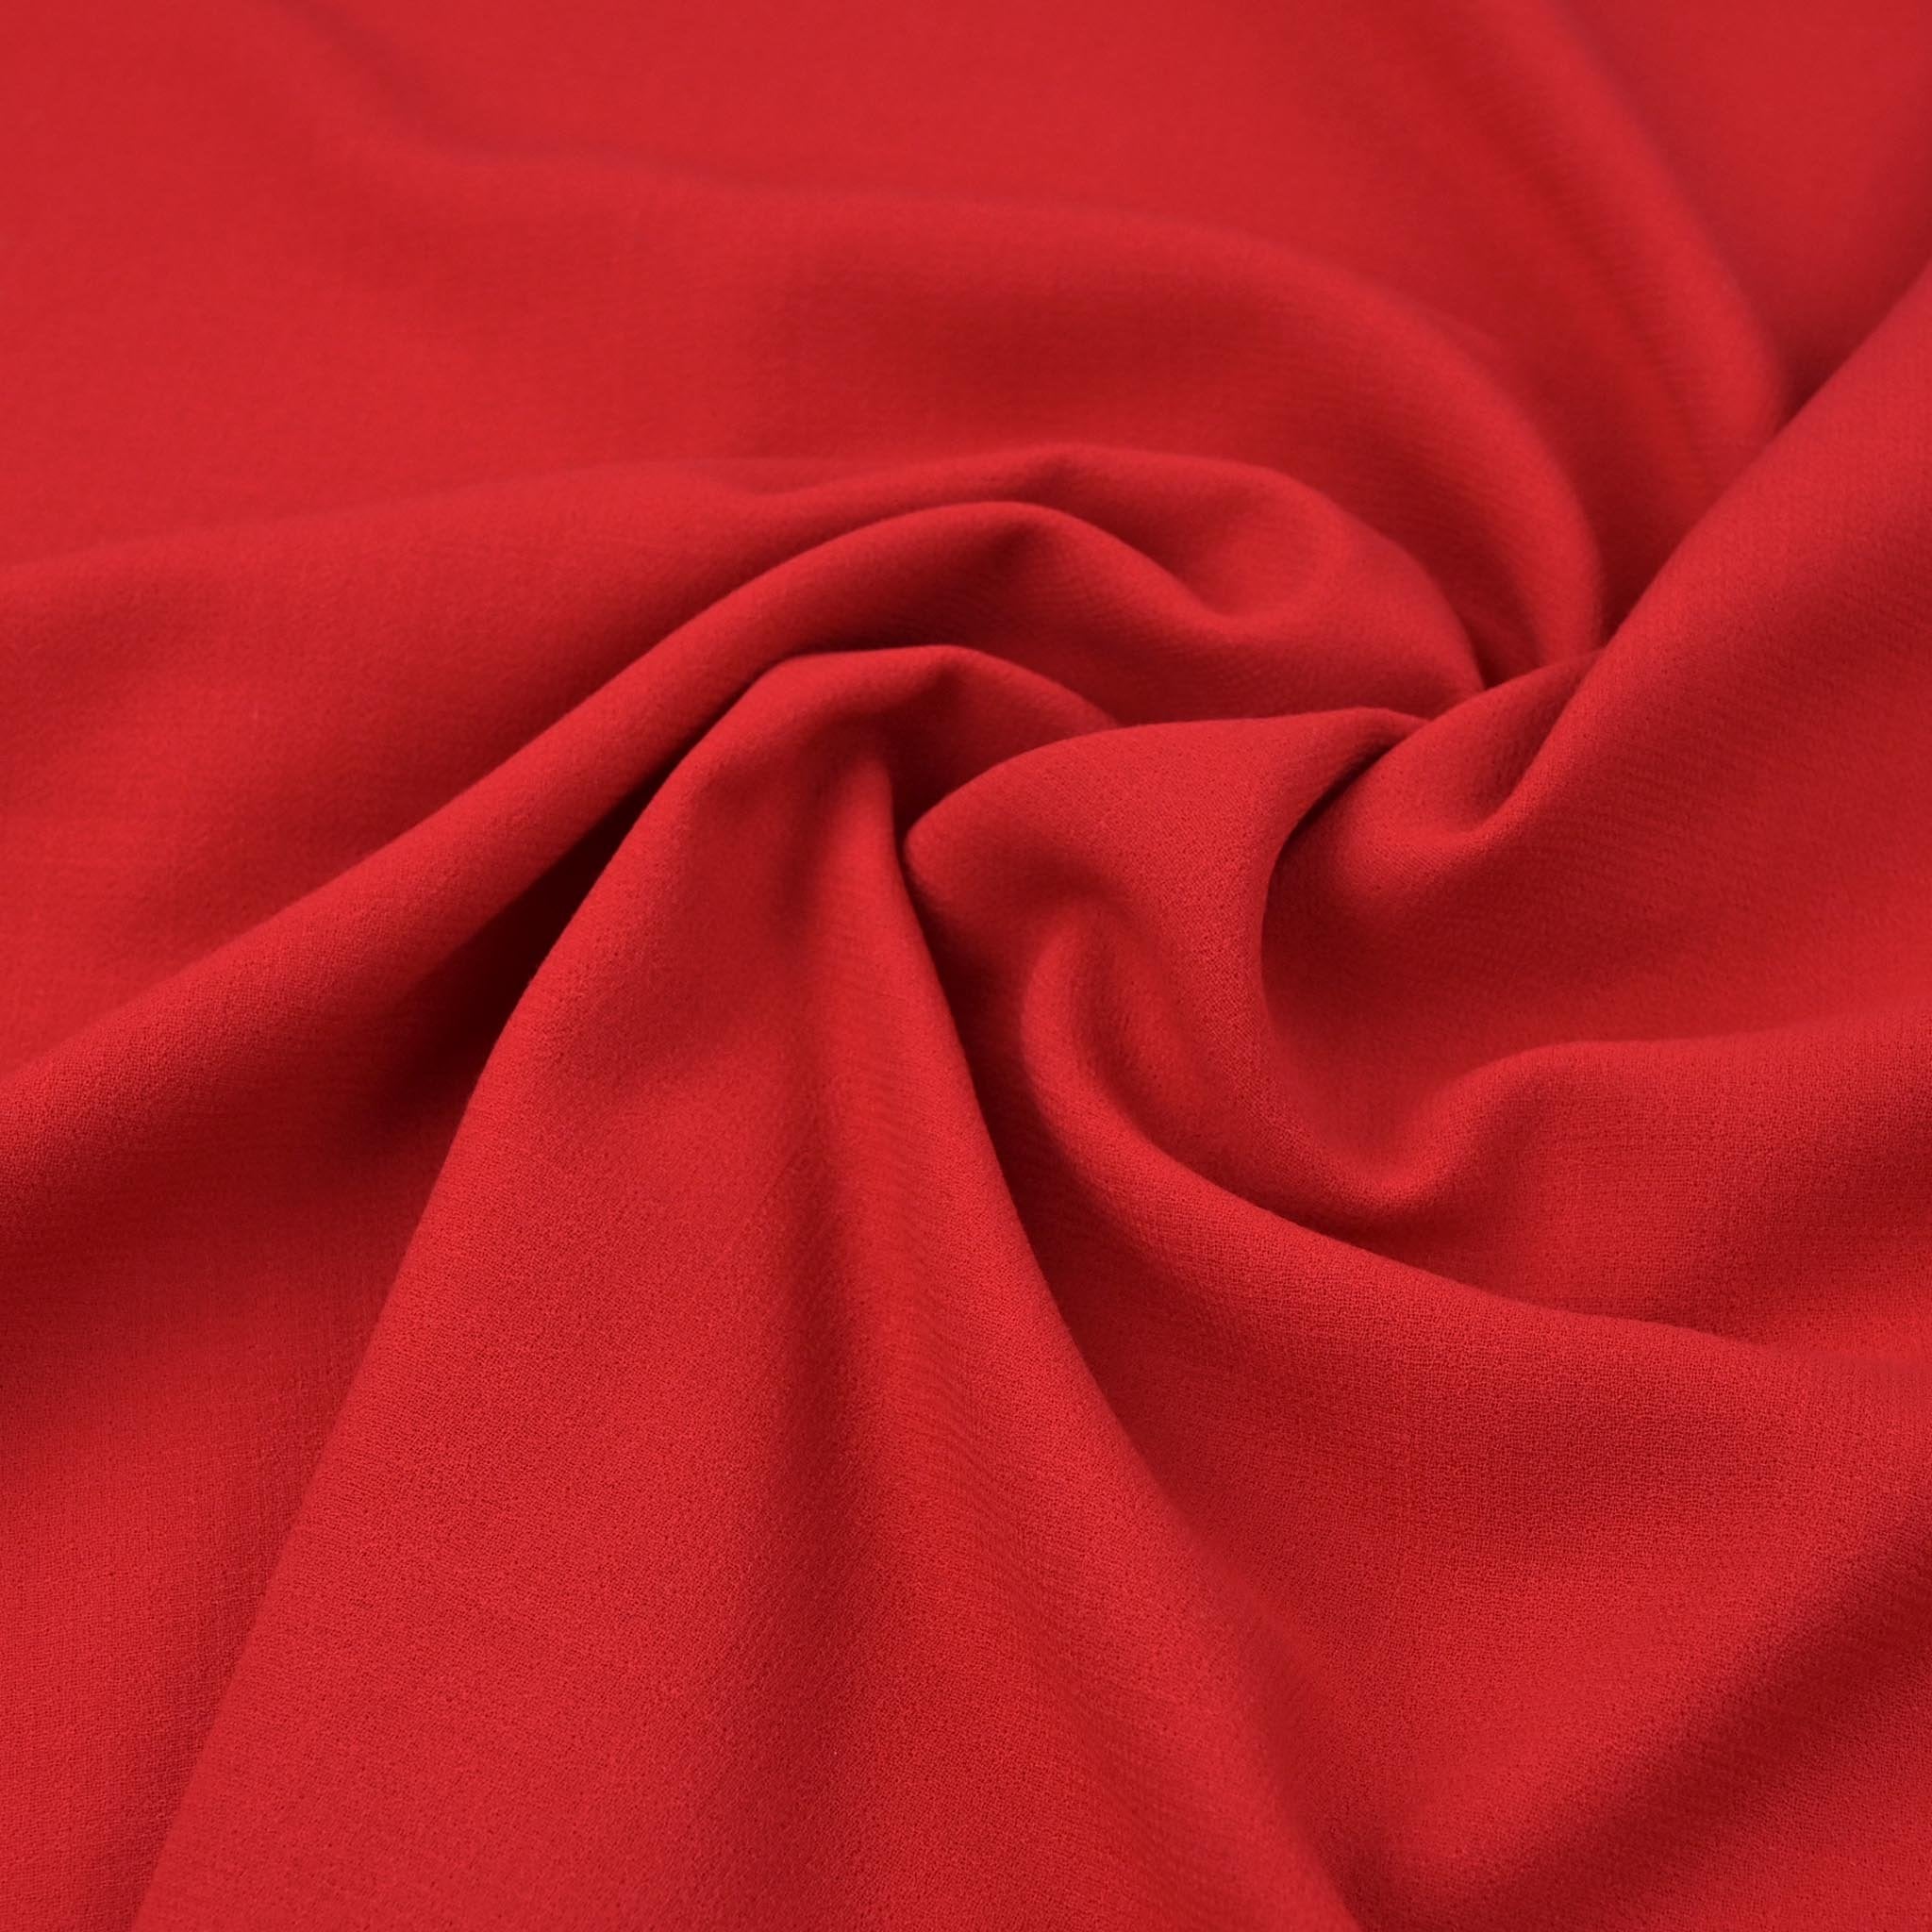 Red Doublewave Crepe Fabric 98880